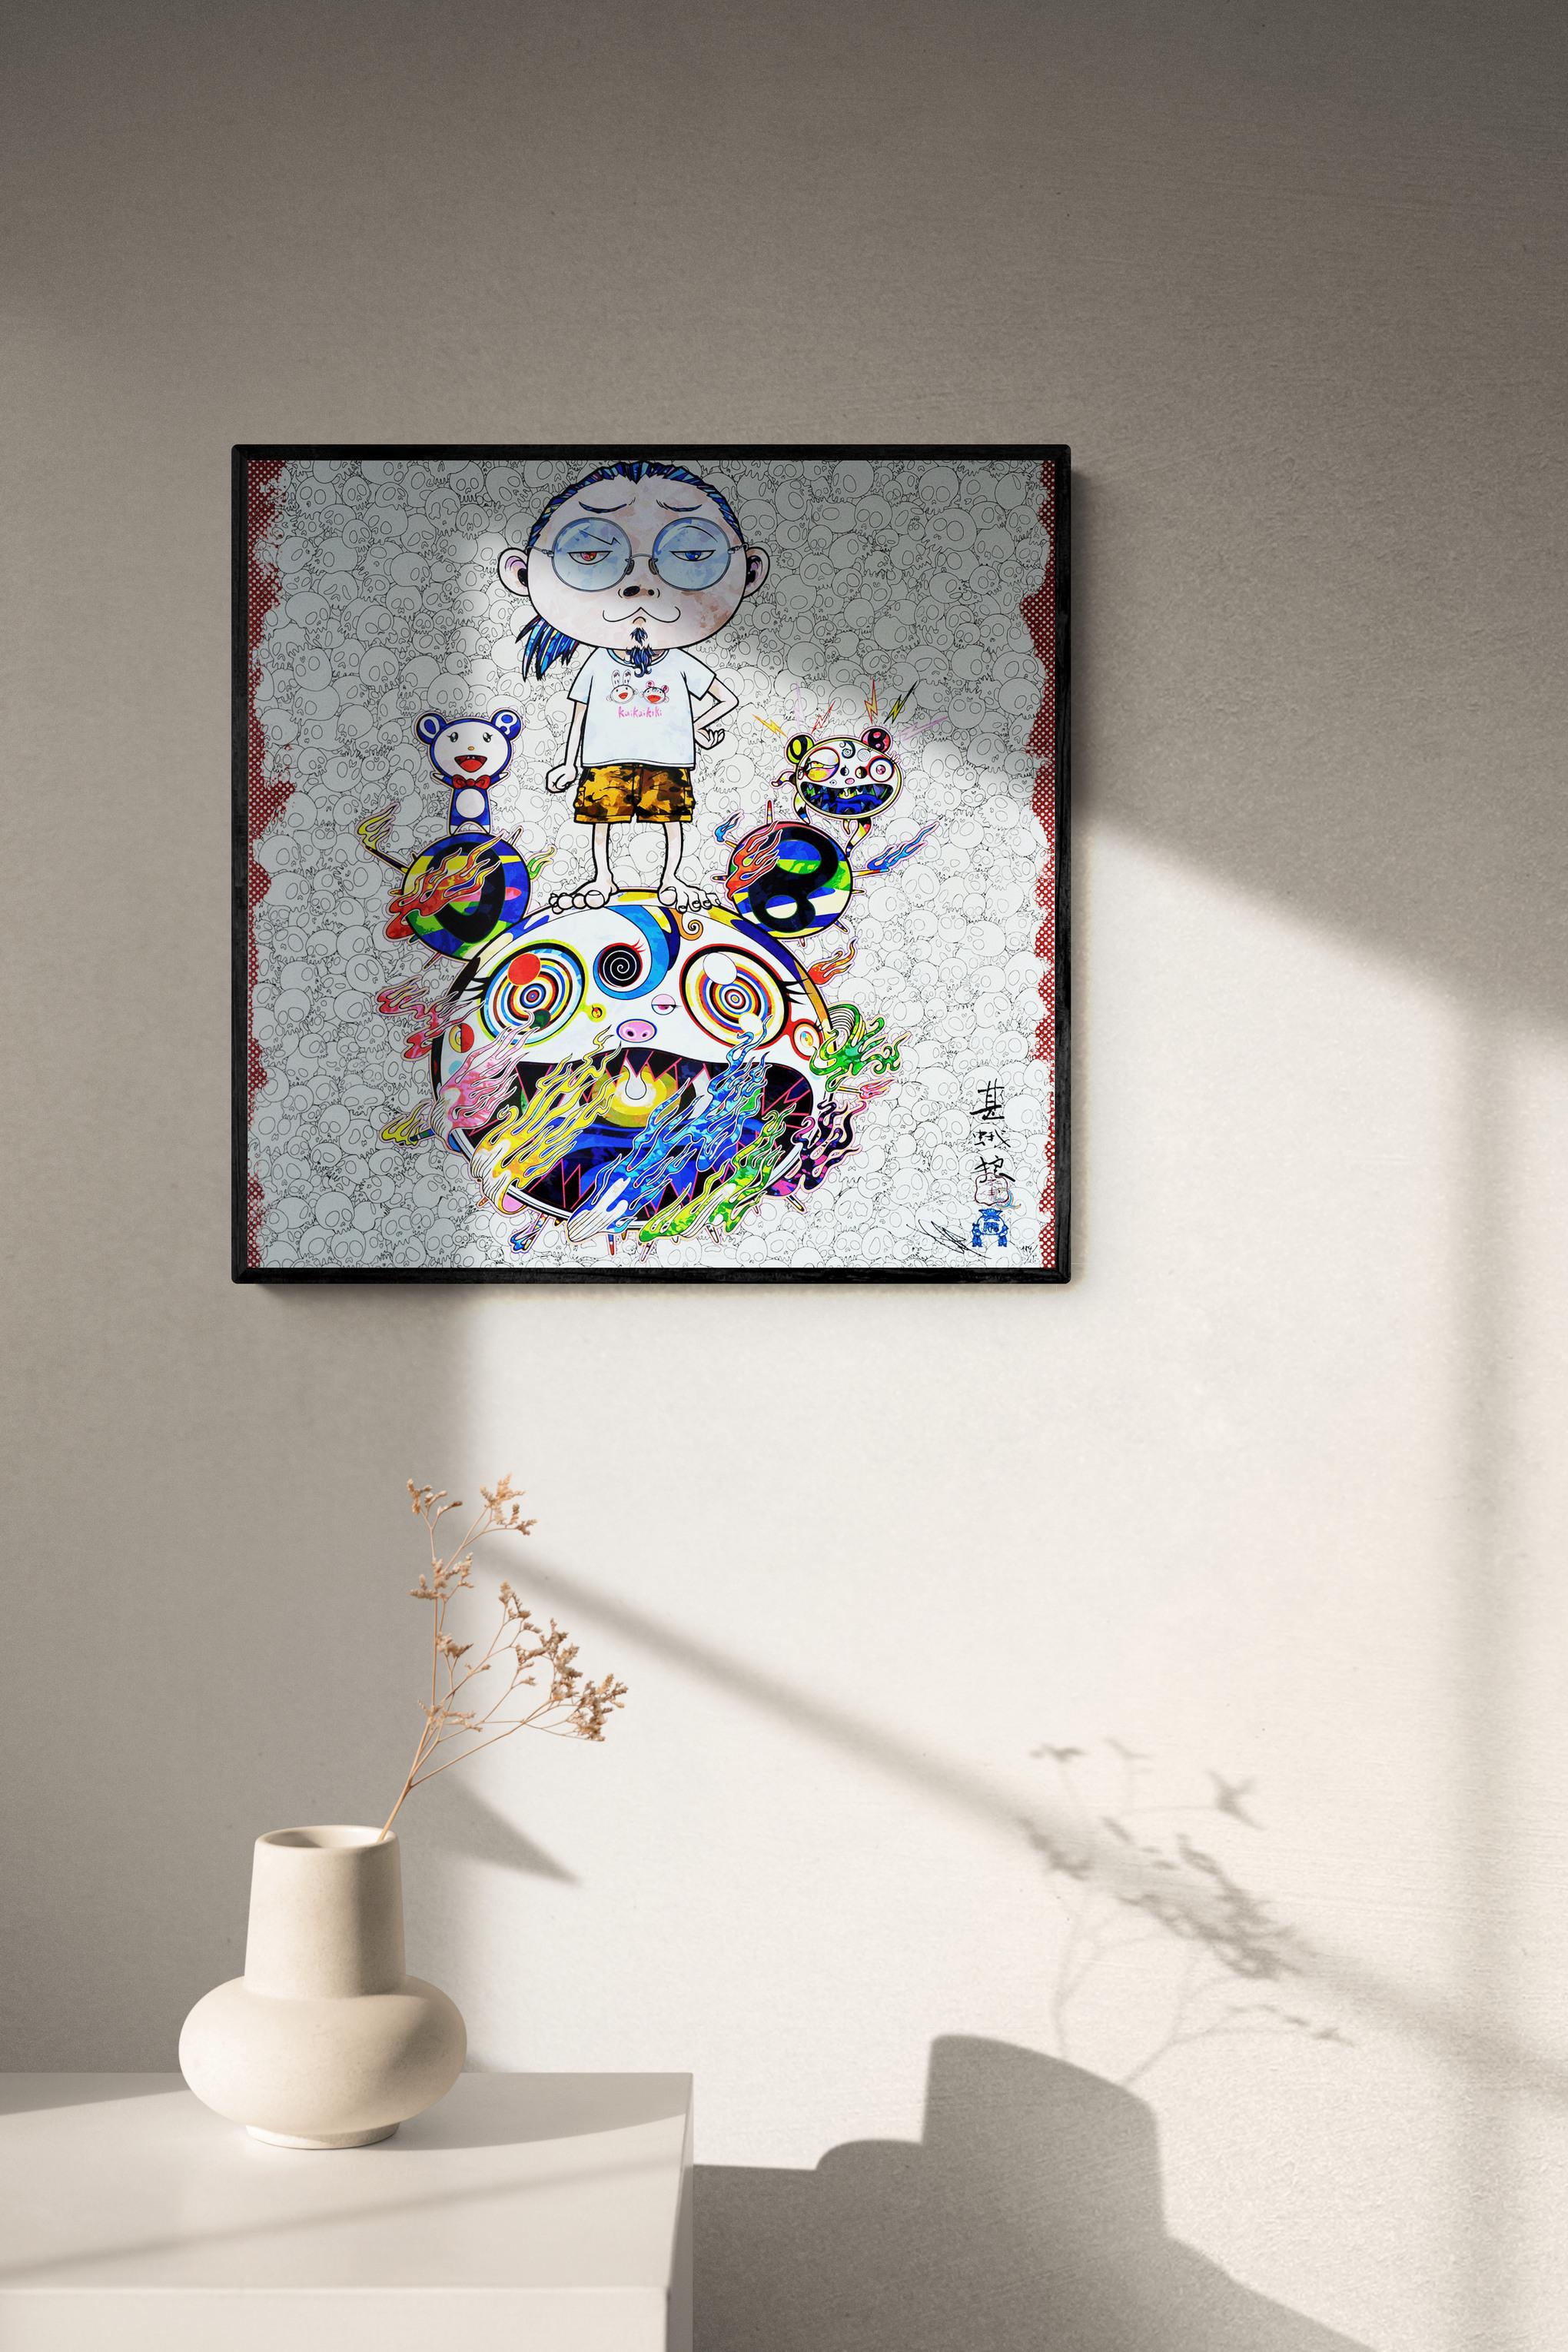 Takashi Murakami - Obliterate the Self and Even a Fire is Cool
Date of creation: 2013
Medium: Offset lithograph with silver on paper
Edition: 300
Size: 50 x 50 cm
Observations: Offset lithograph with silver on paper hand signed by Takashi Murakami.